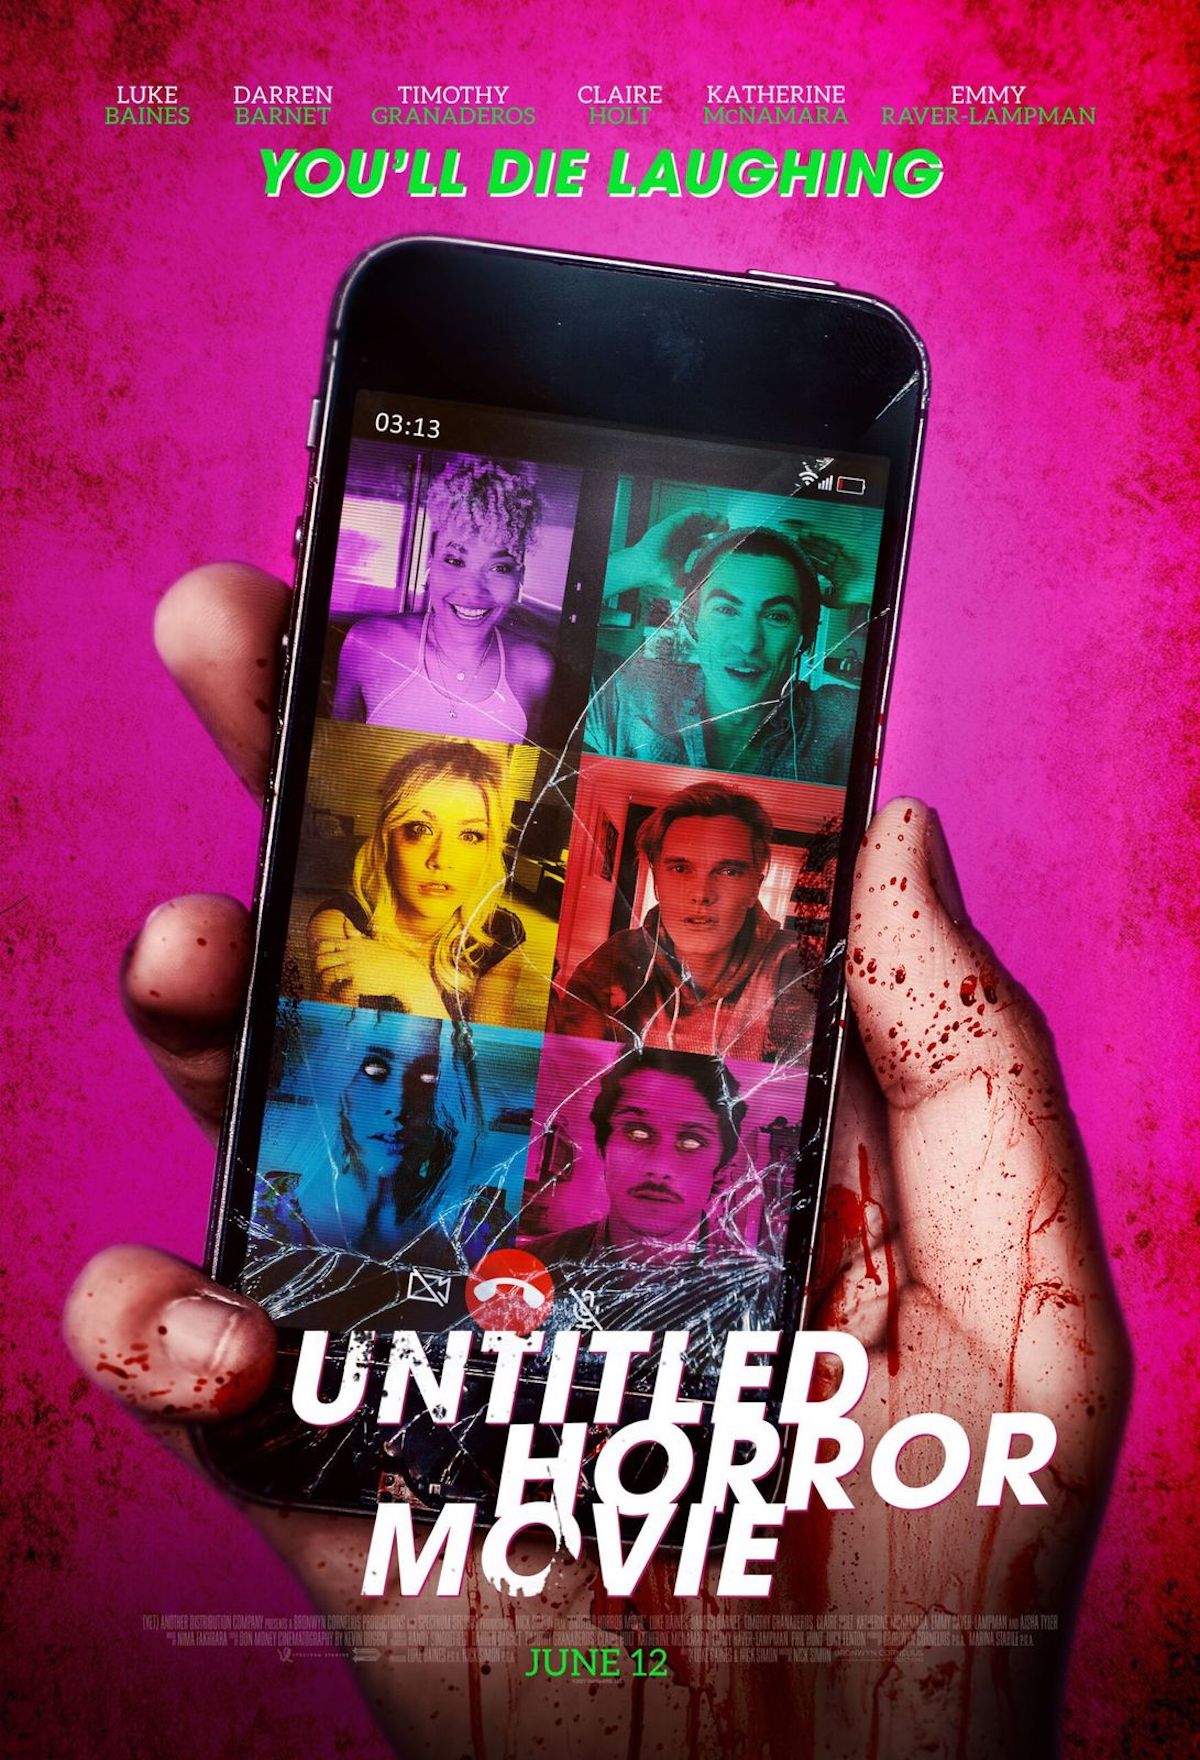 'Untitled Horror Movie' poster for the found footage movie featuring